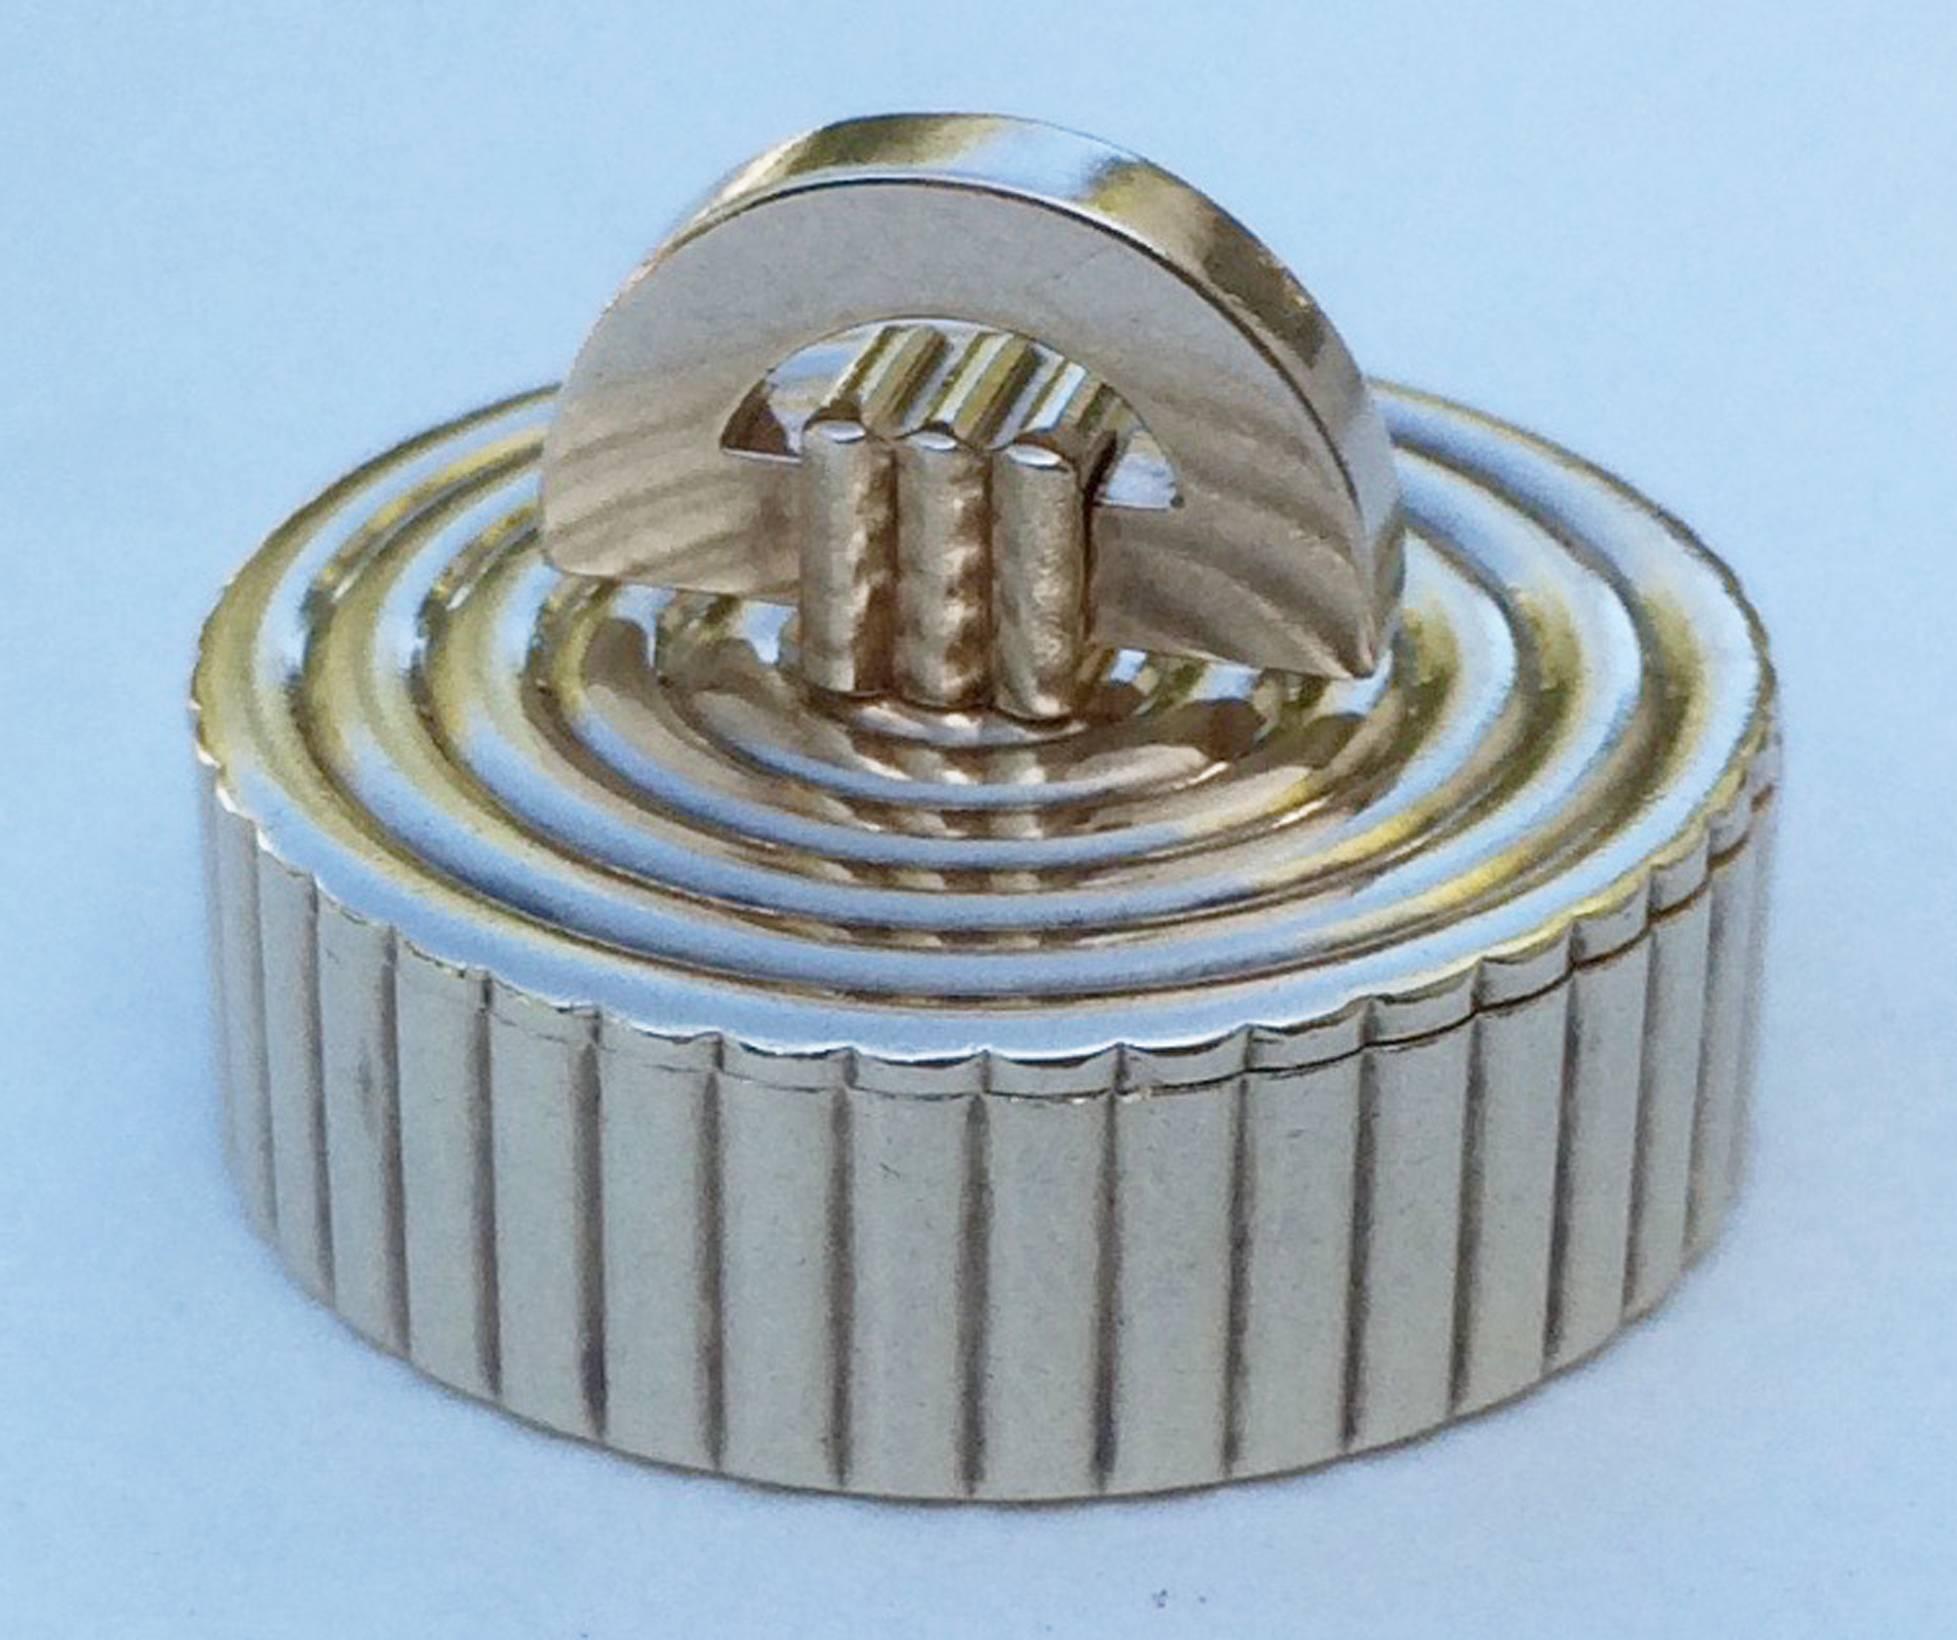 A fine Cartier London rose gold pill/snuff box. Signed item retains original Cartier gilt leather fitted box. Machine turned item features a fold-over finial and tightly fitted case. Item hallmarked for London and Elizabeth coronation, 1953.